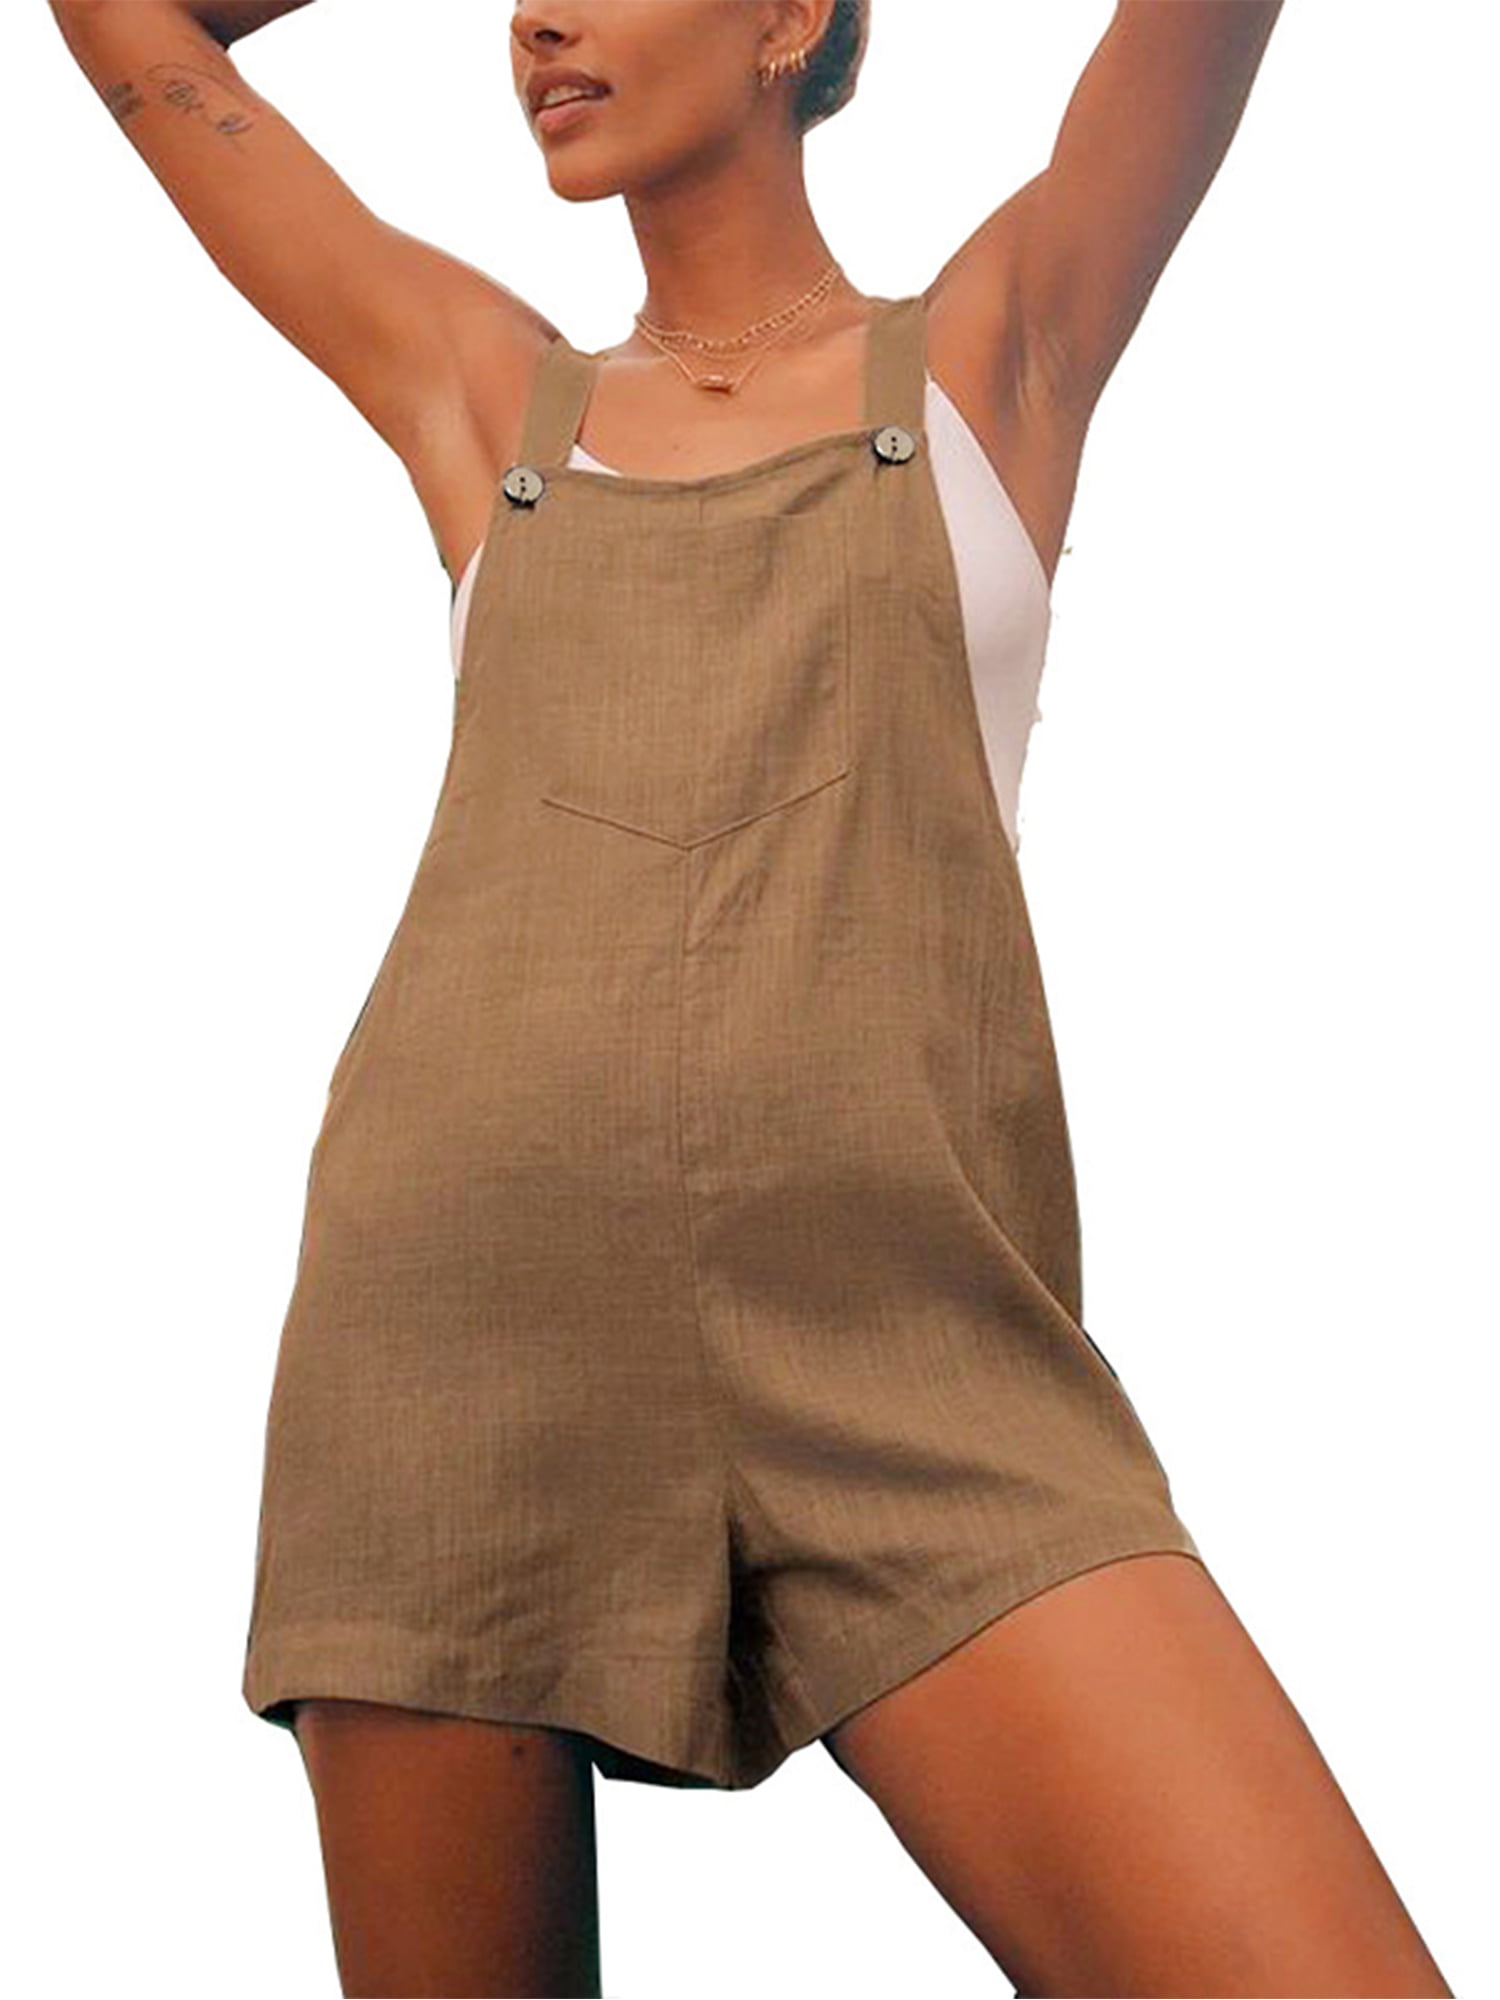 Womens Cotton Linen Overalls Baggy Strap Sleeveless Jumpsuits Casual Spaghetti Strap Wide Leg Dungarees Rompers Loose Sleeveless Long Playsuit Dungarees Clubwear Rompers 